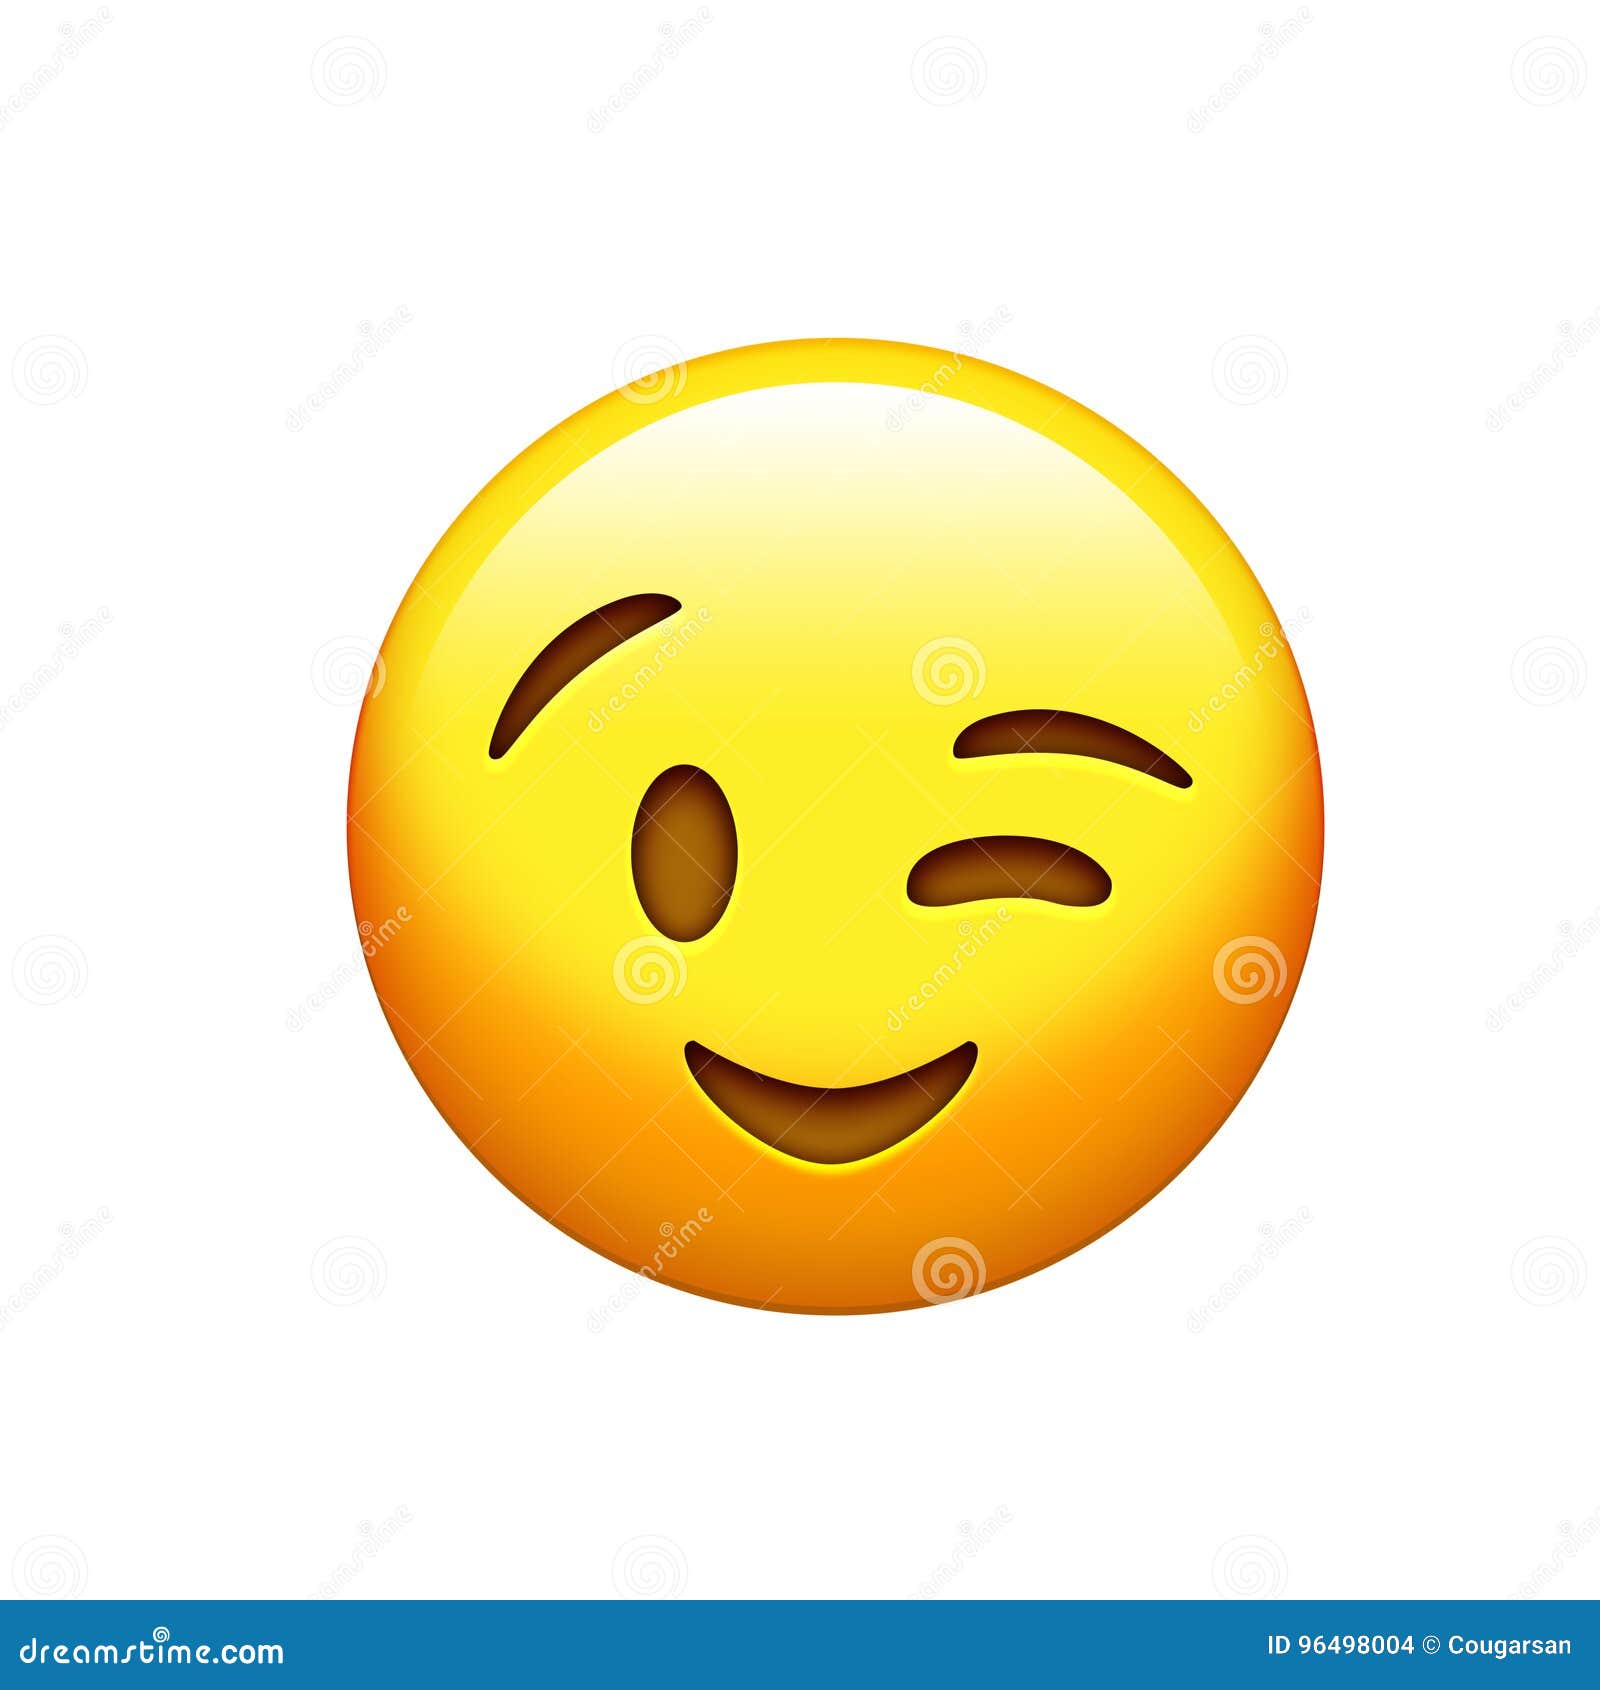 yellow smiley face and single wink icon